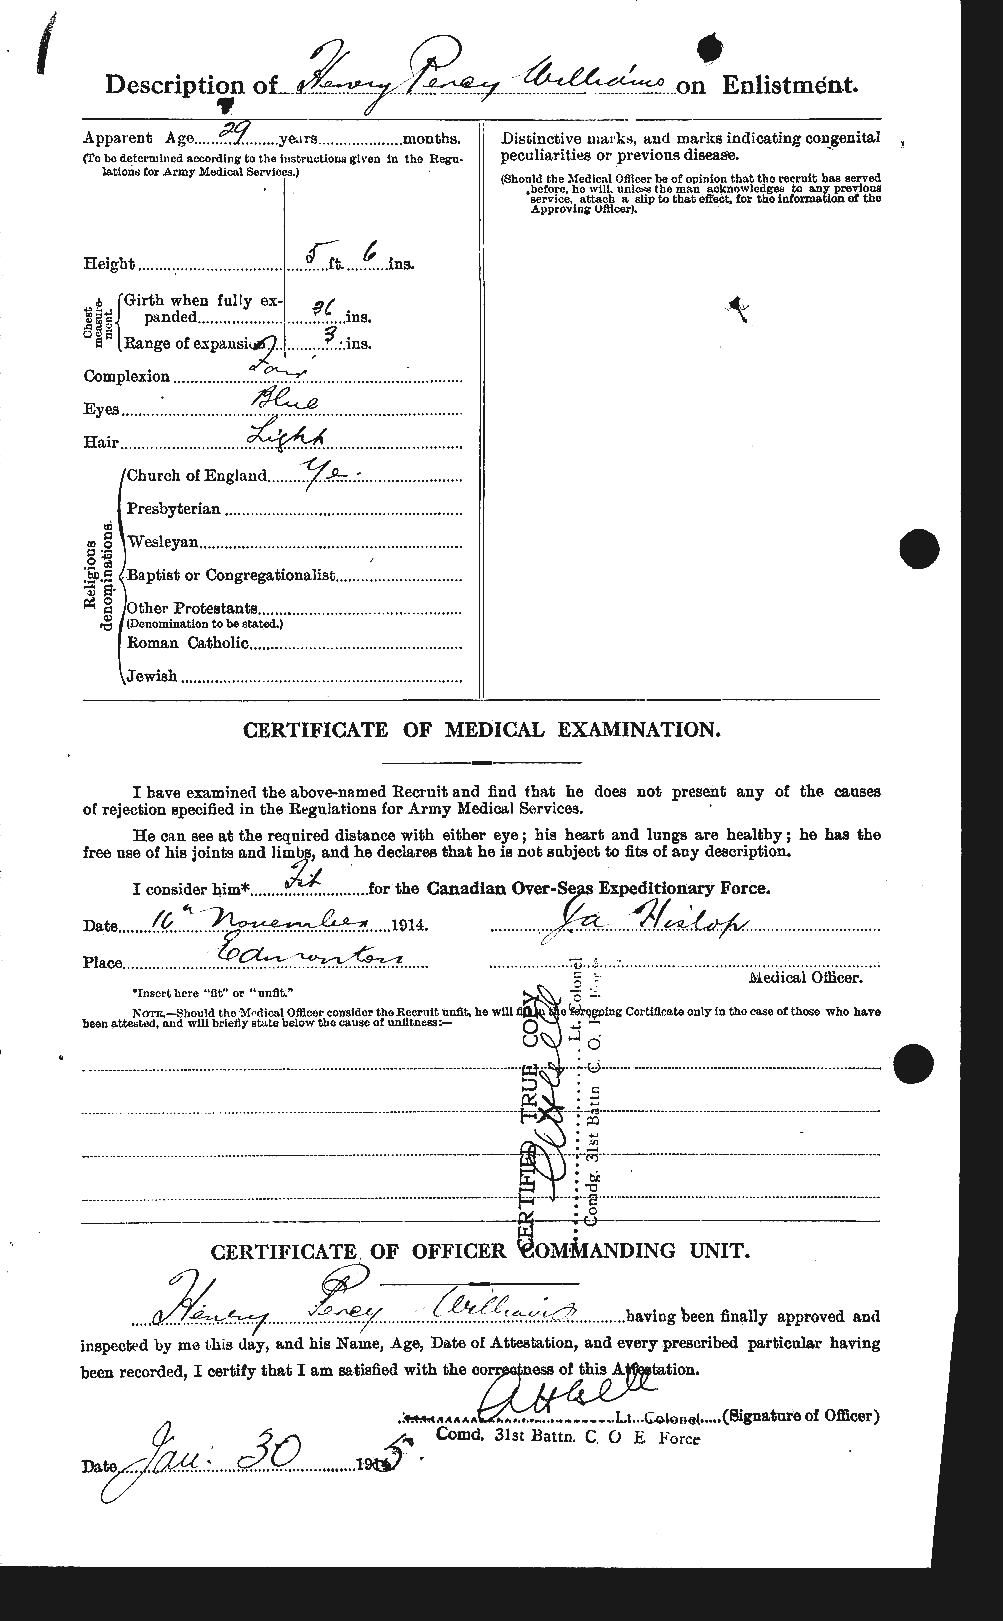 Personnel Records of the First World War - CEF 677380b